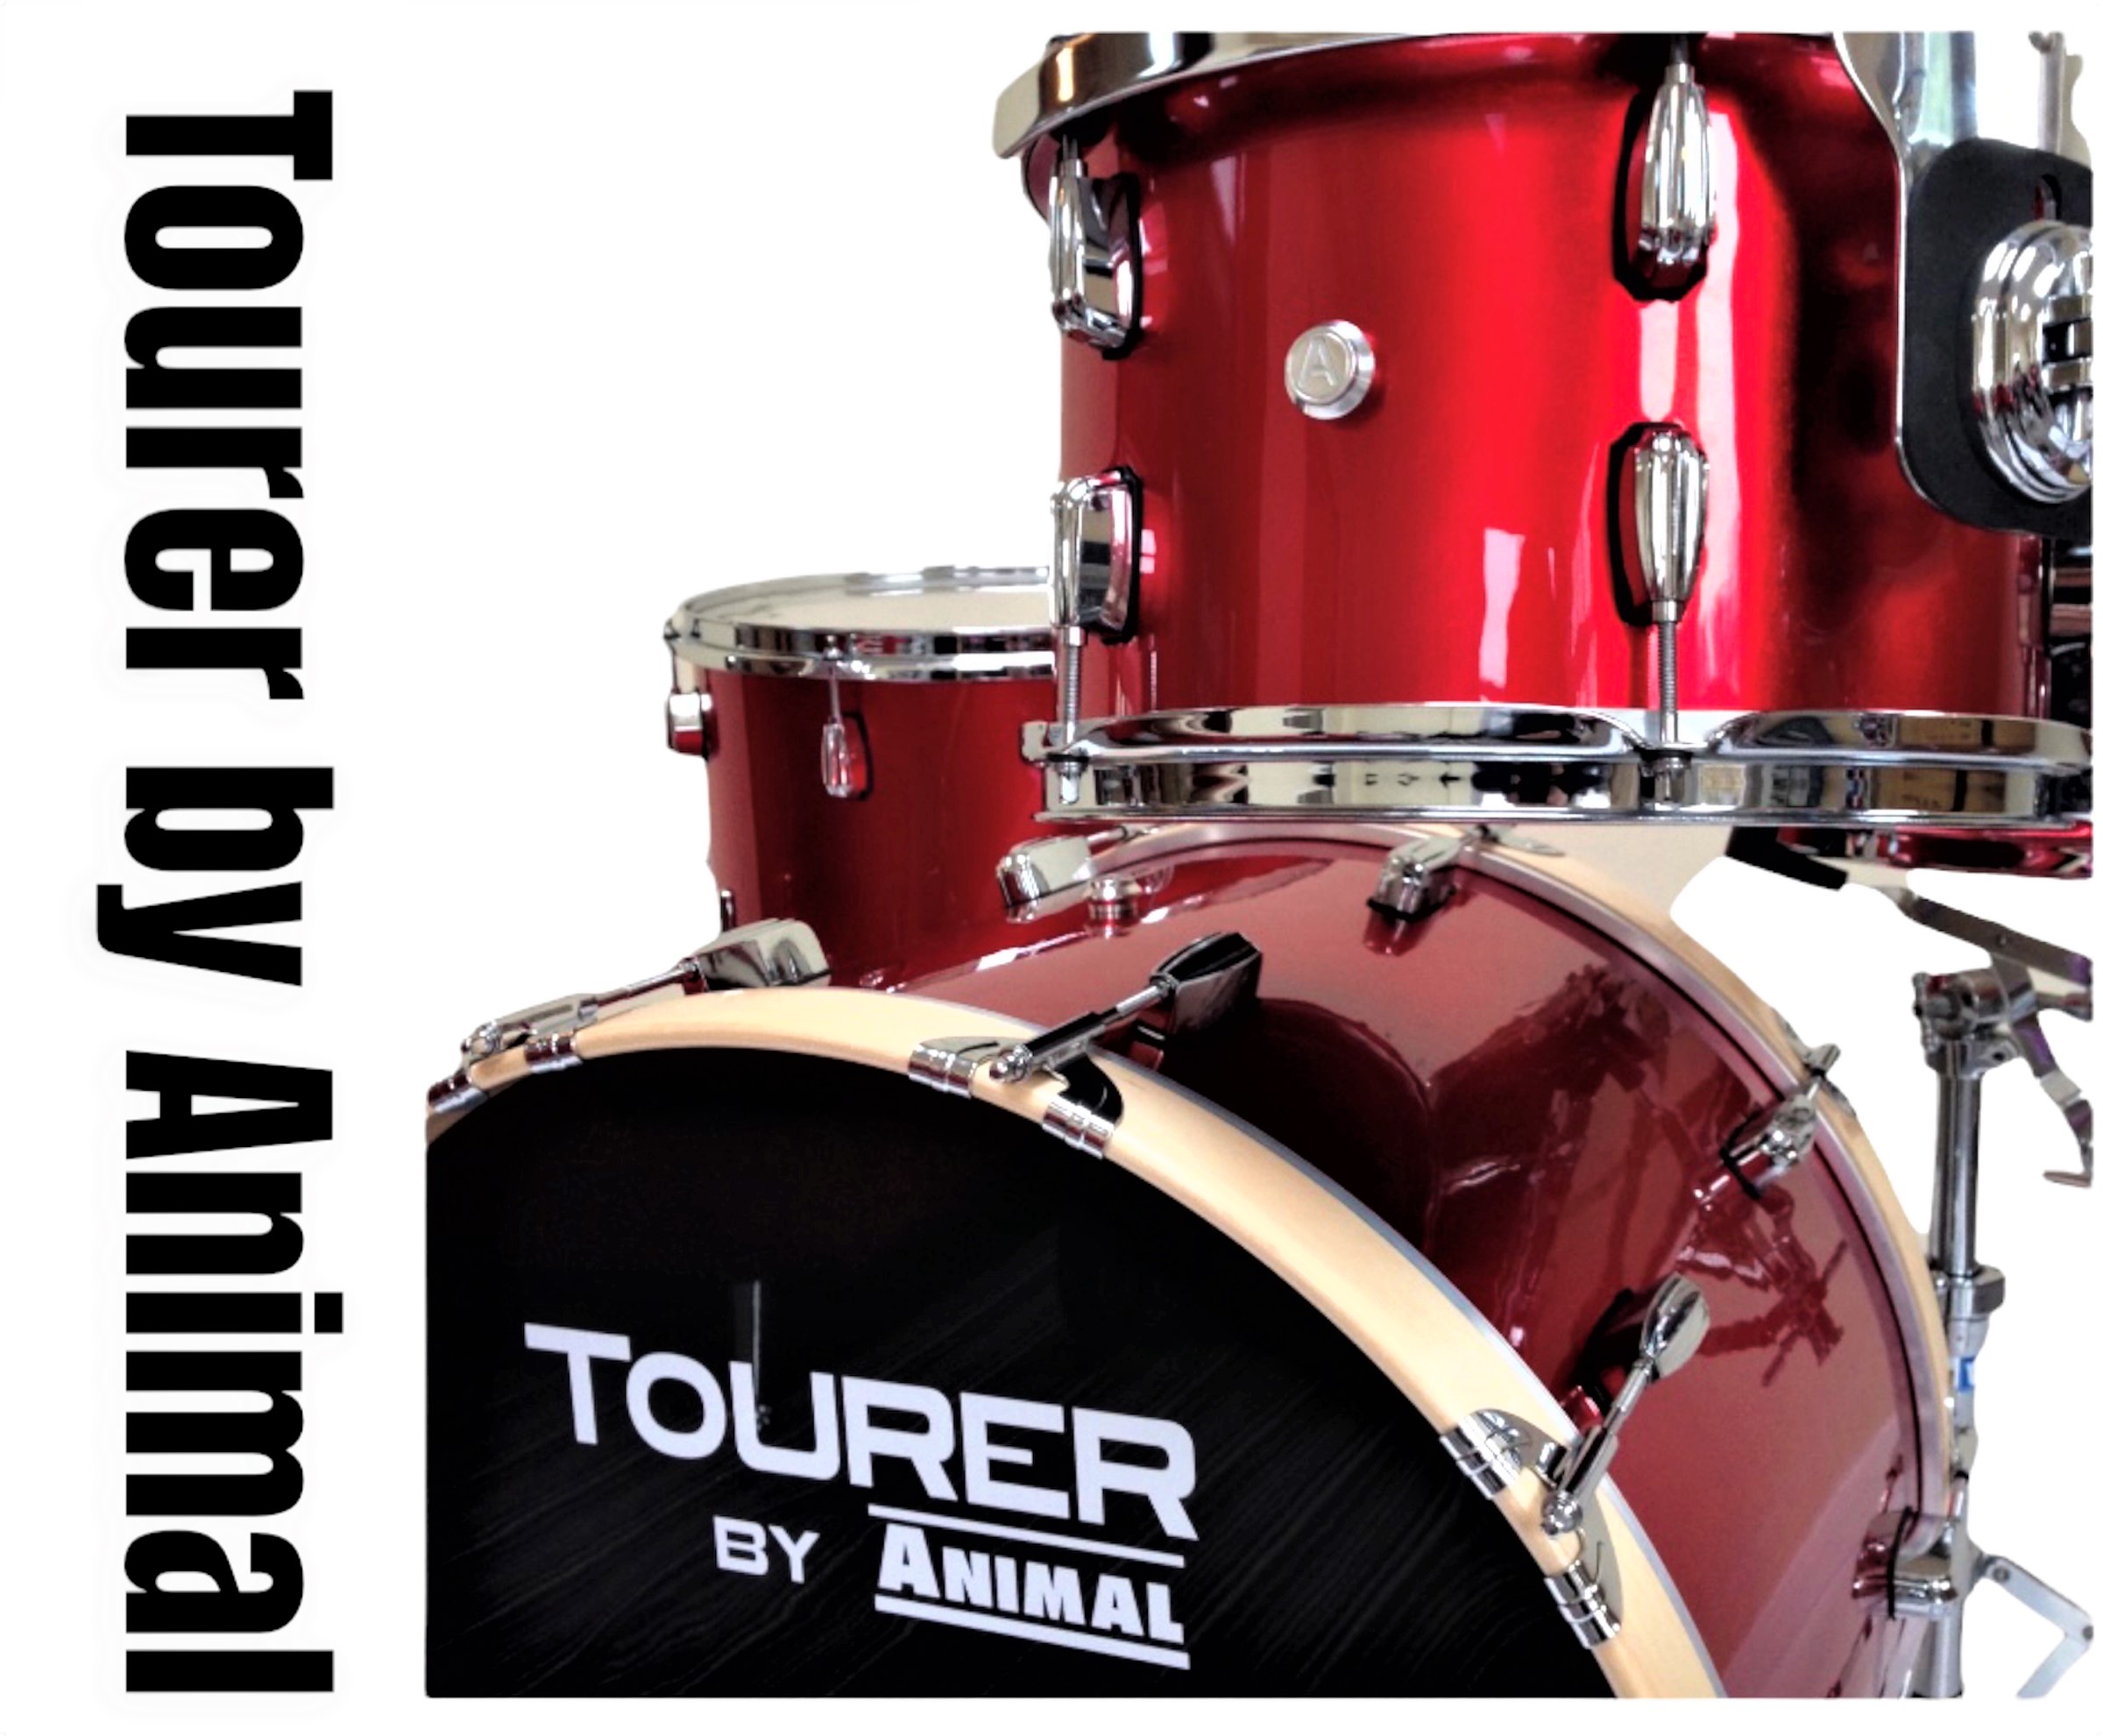 Tourer by Animal Drum Kit with Red Sparkle Drum Wrap